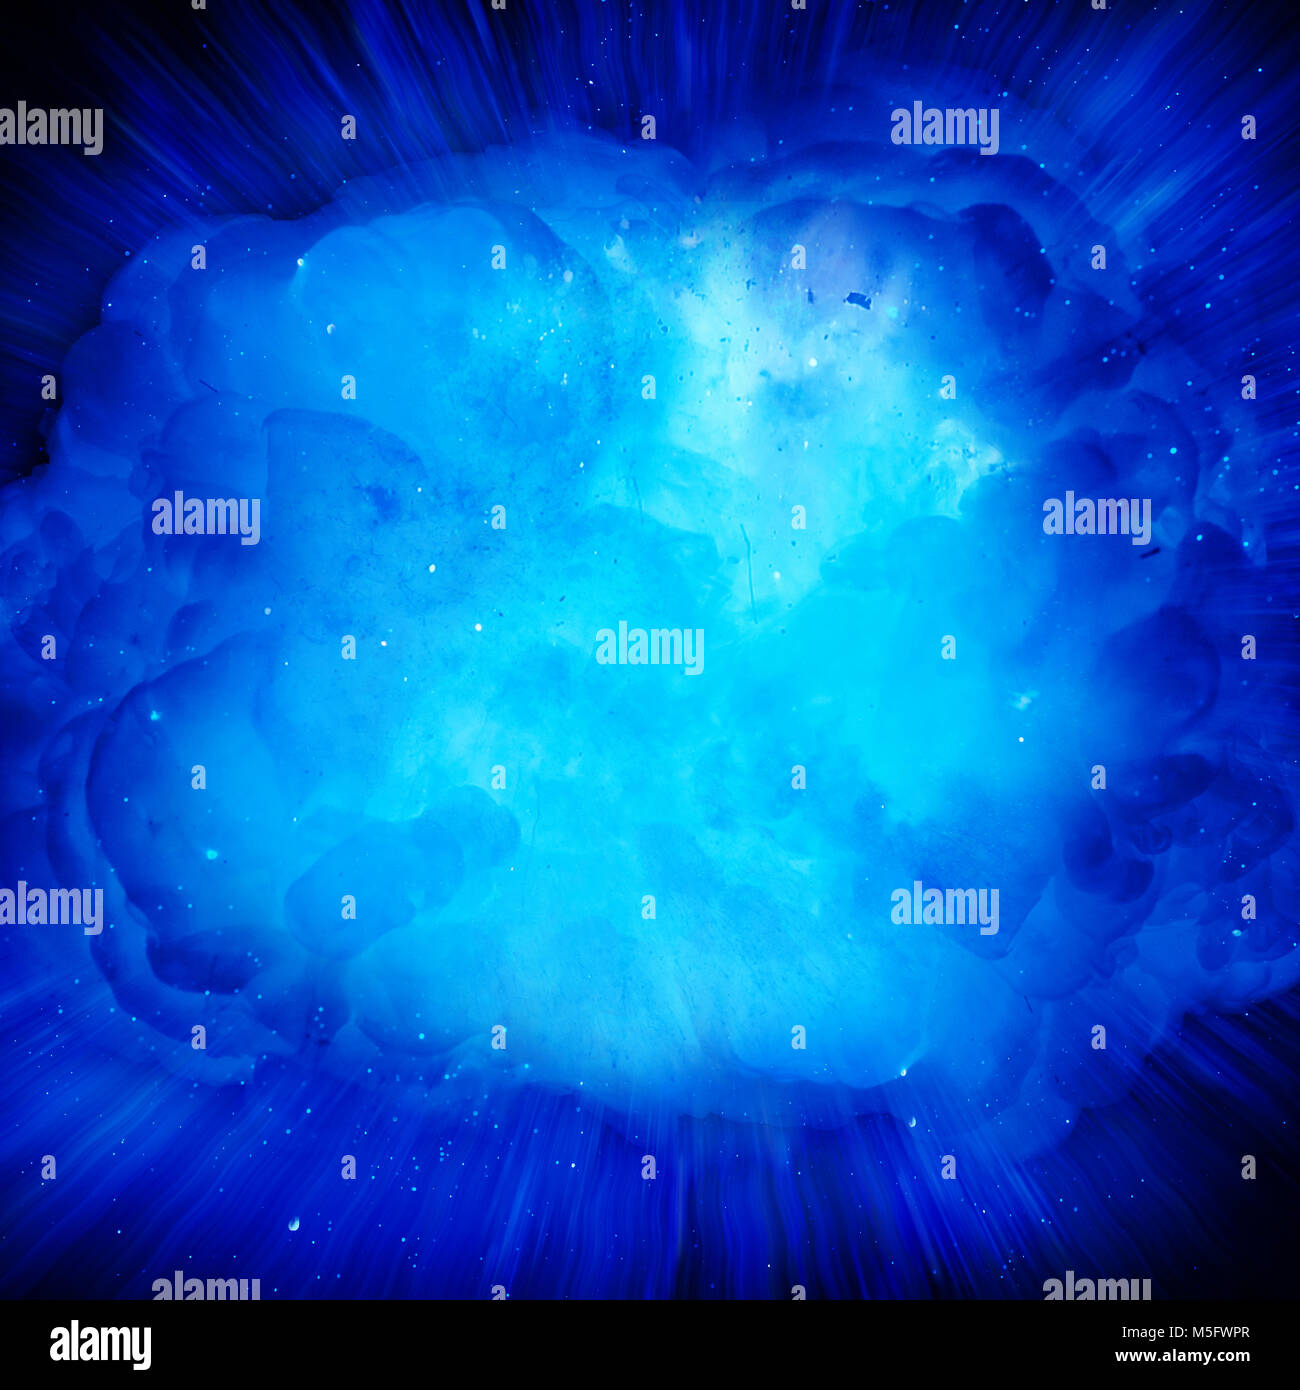 Blue fire explosion with sparks and smoke against black background Stock Photo